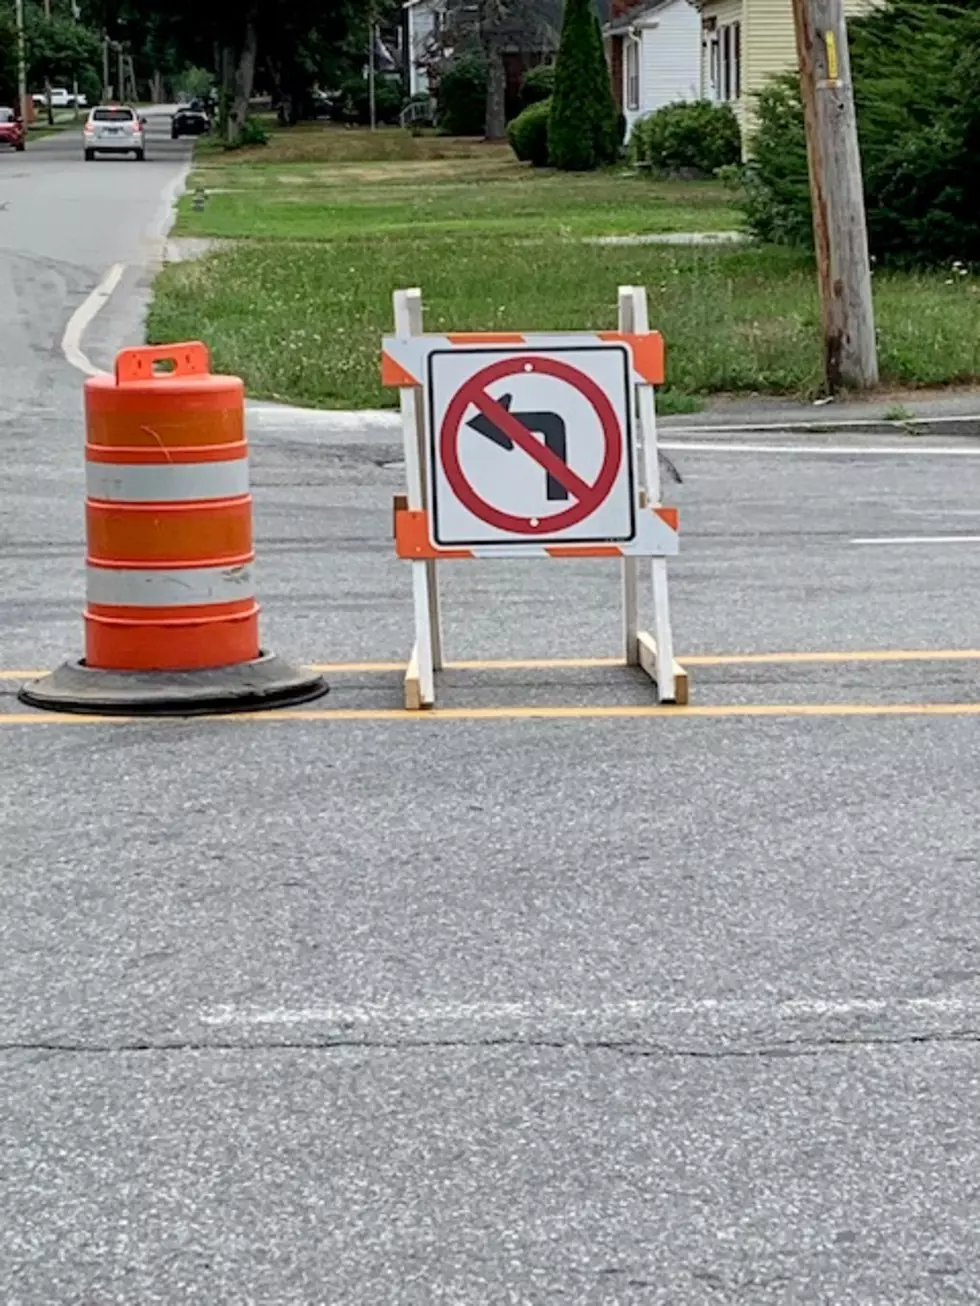 City Of Bangor Tries Out “Right Turn Only” On Union And 15th Streets